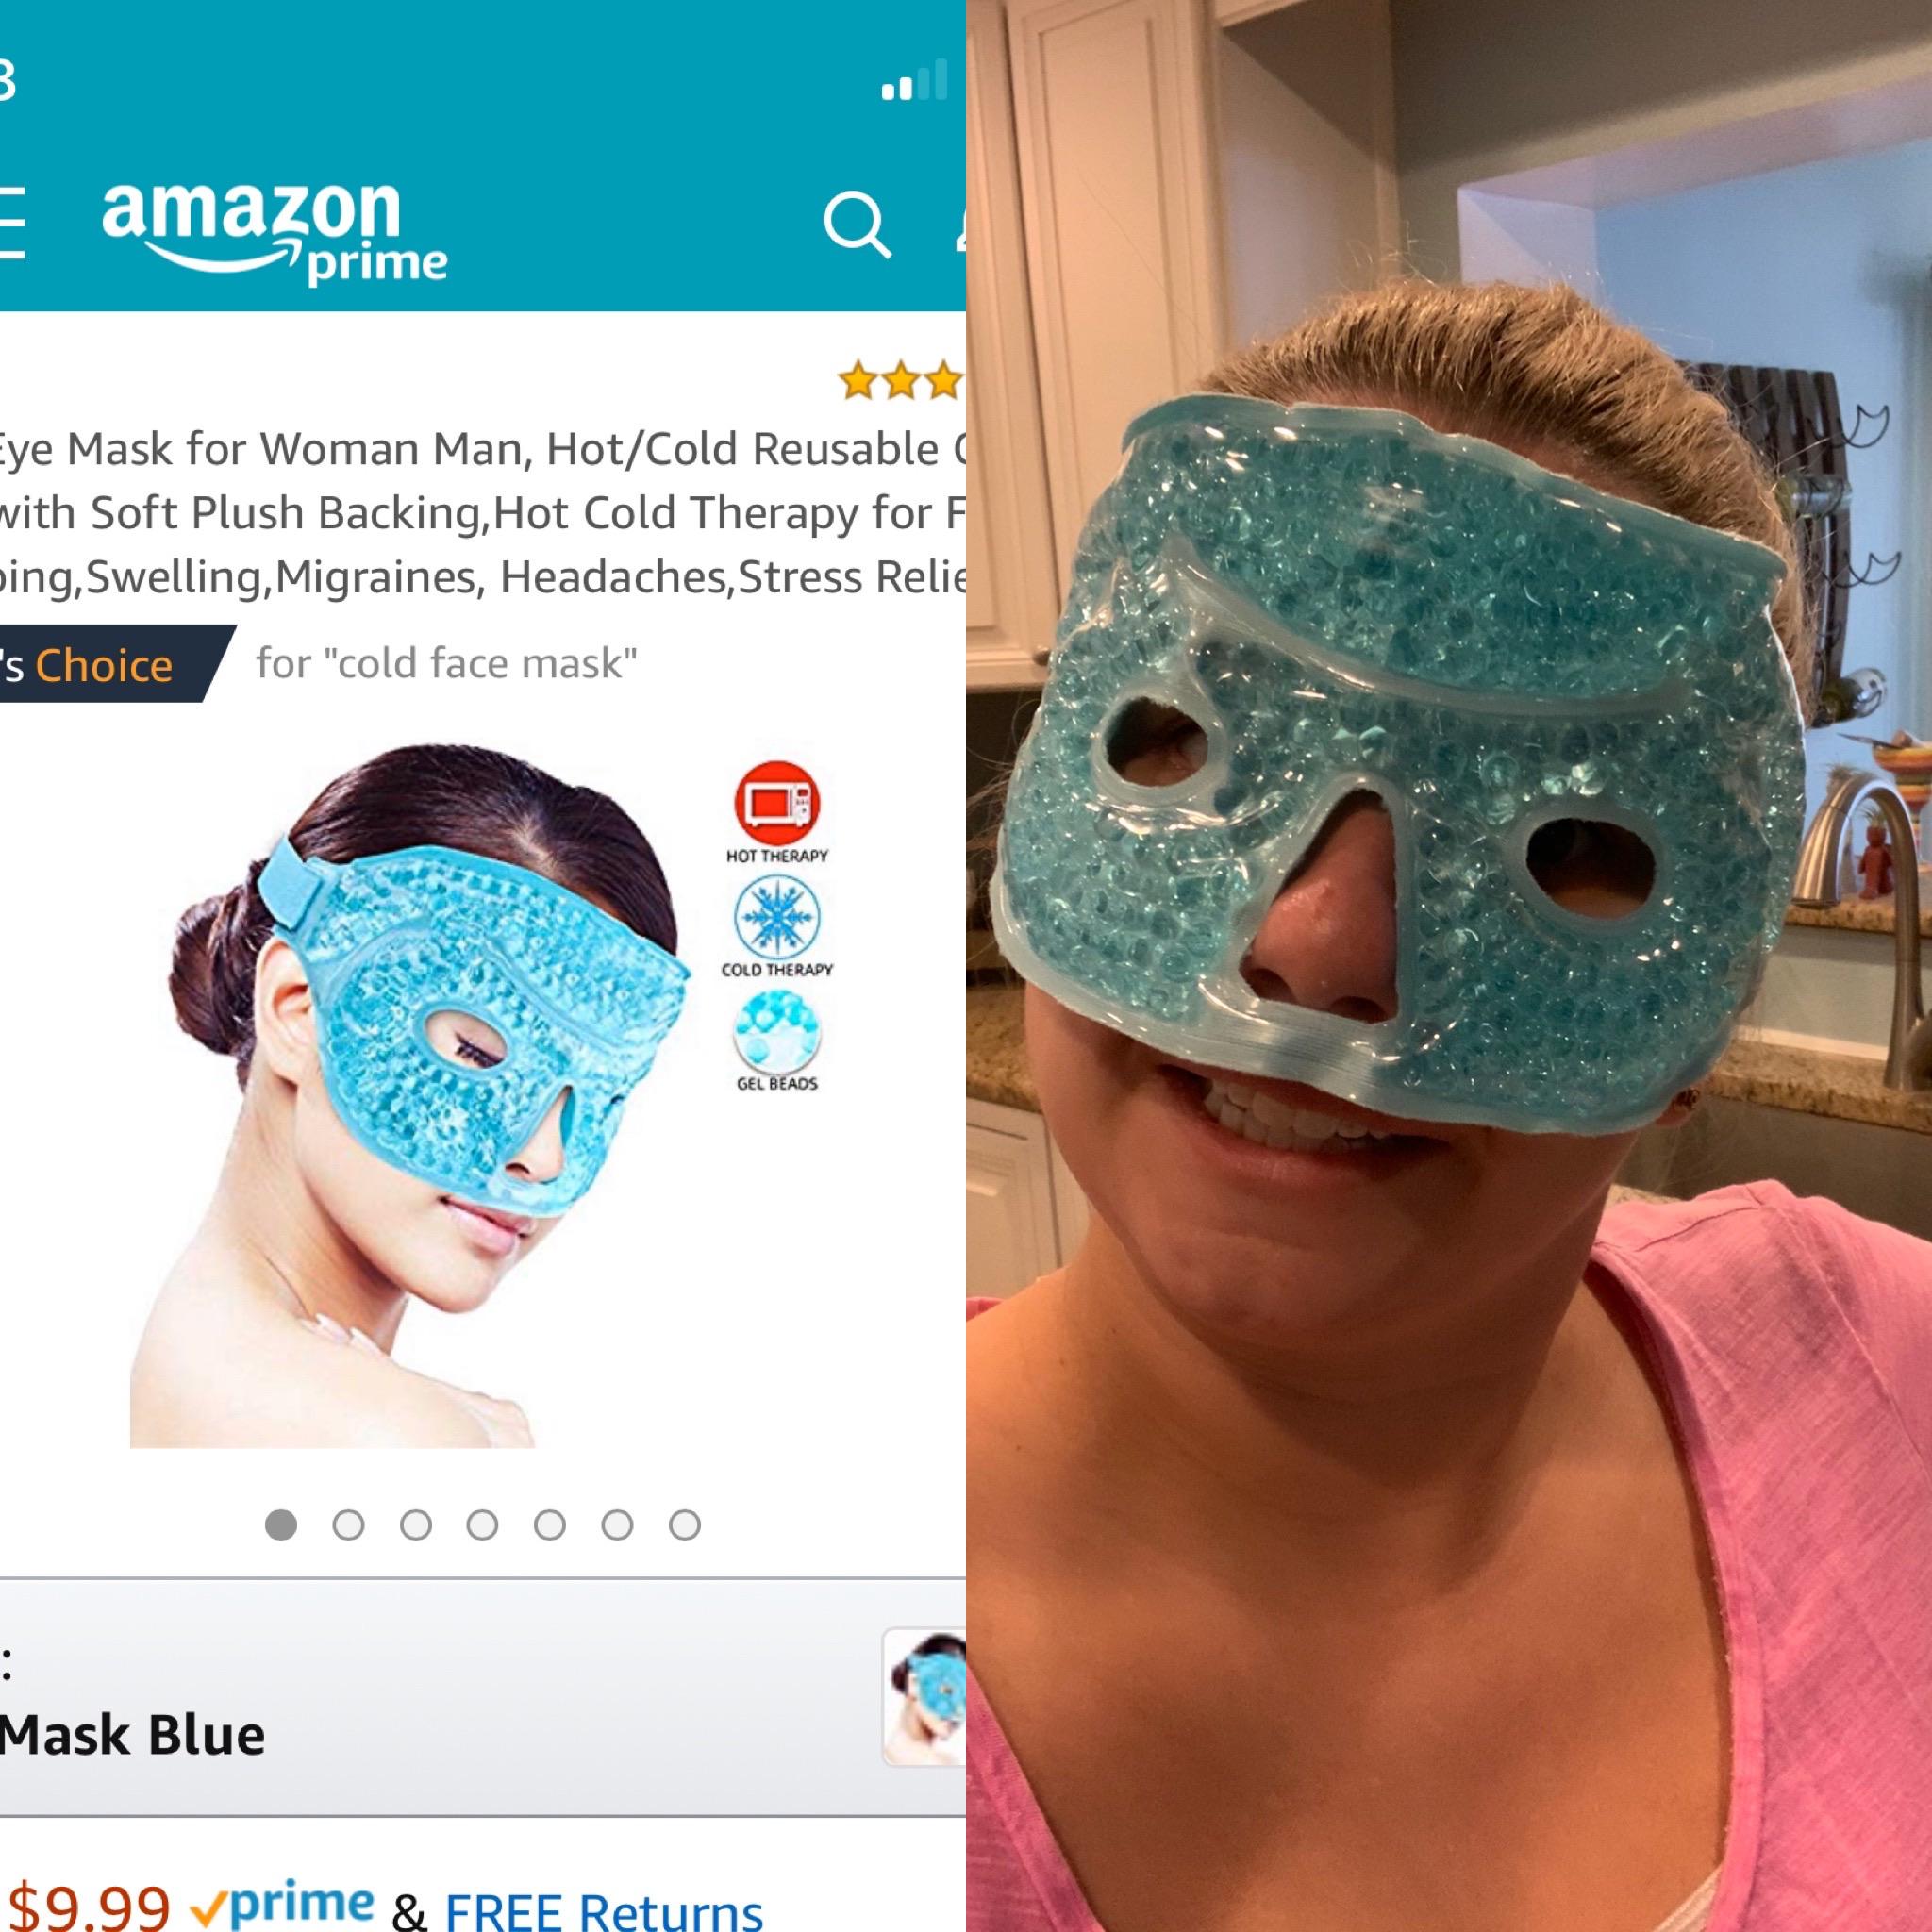 mask - 3 amazon prime Eye Mask for Woman Man, HotCold Reusable vith Soft Plush Backing, Hot Cold Therapy for F ping, Swelling, Migraines, Headaches, Stress Relie 's Choice for "cold face mask" Hot Therapy Cold Therapy Gel Beads O O O O O O Mask Blue $9,99